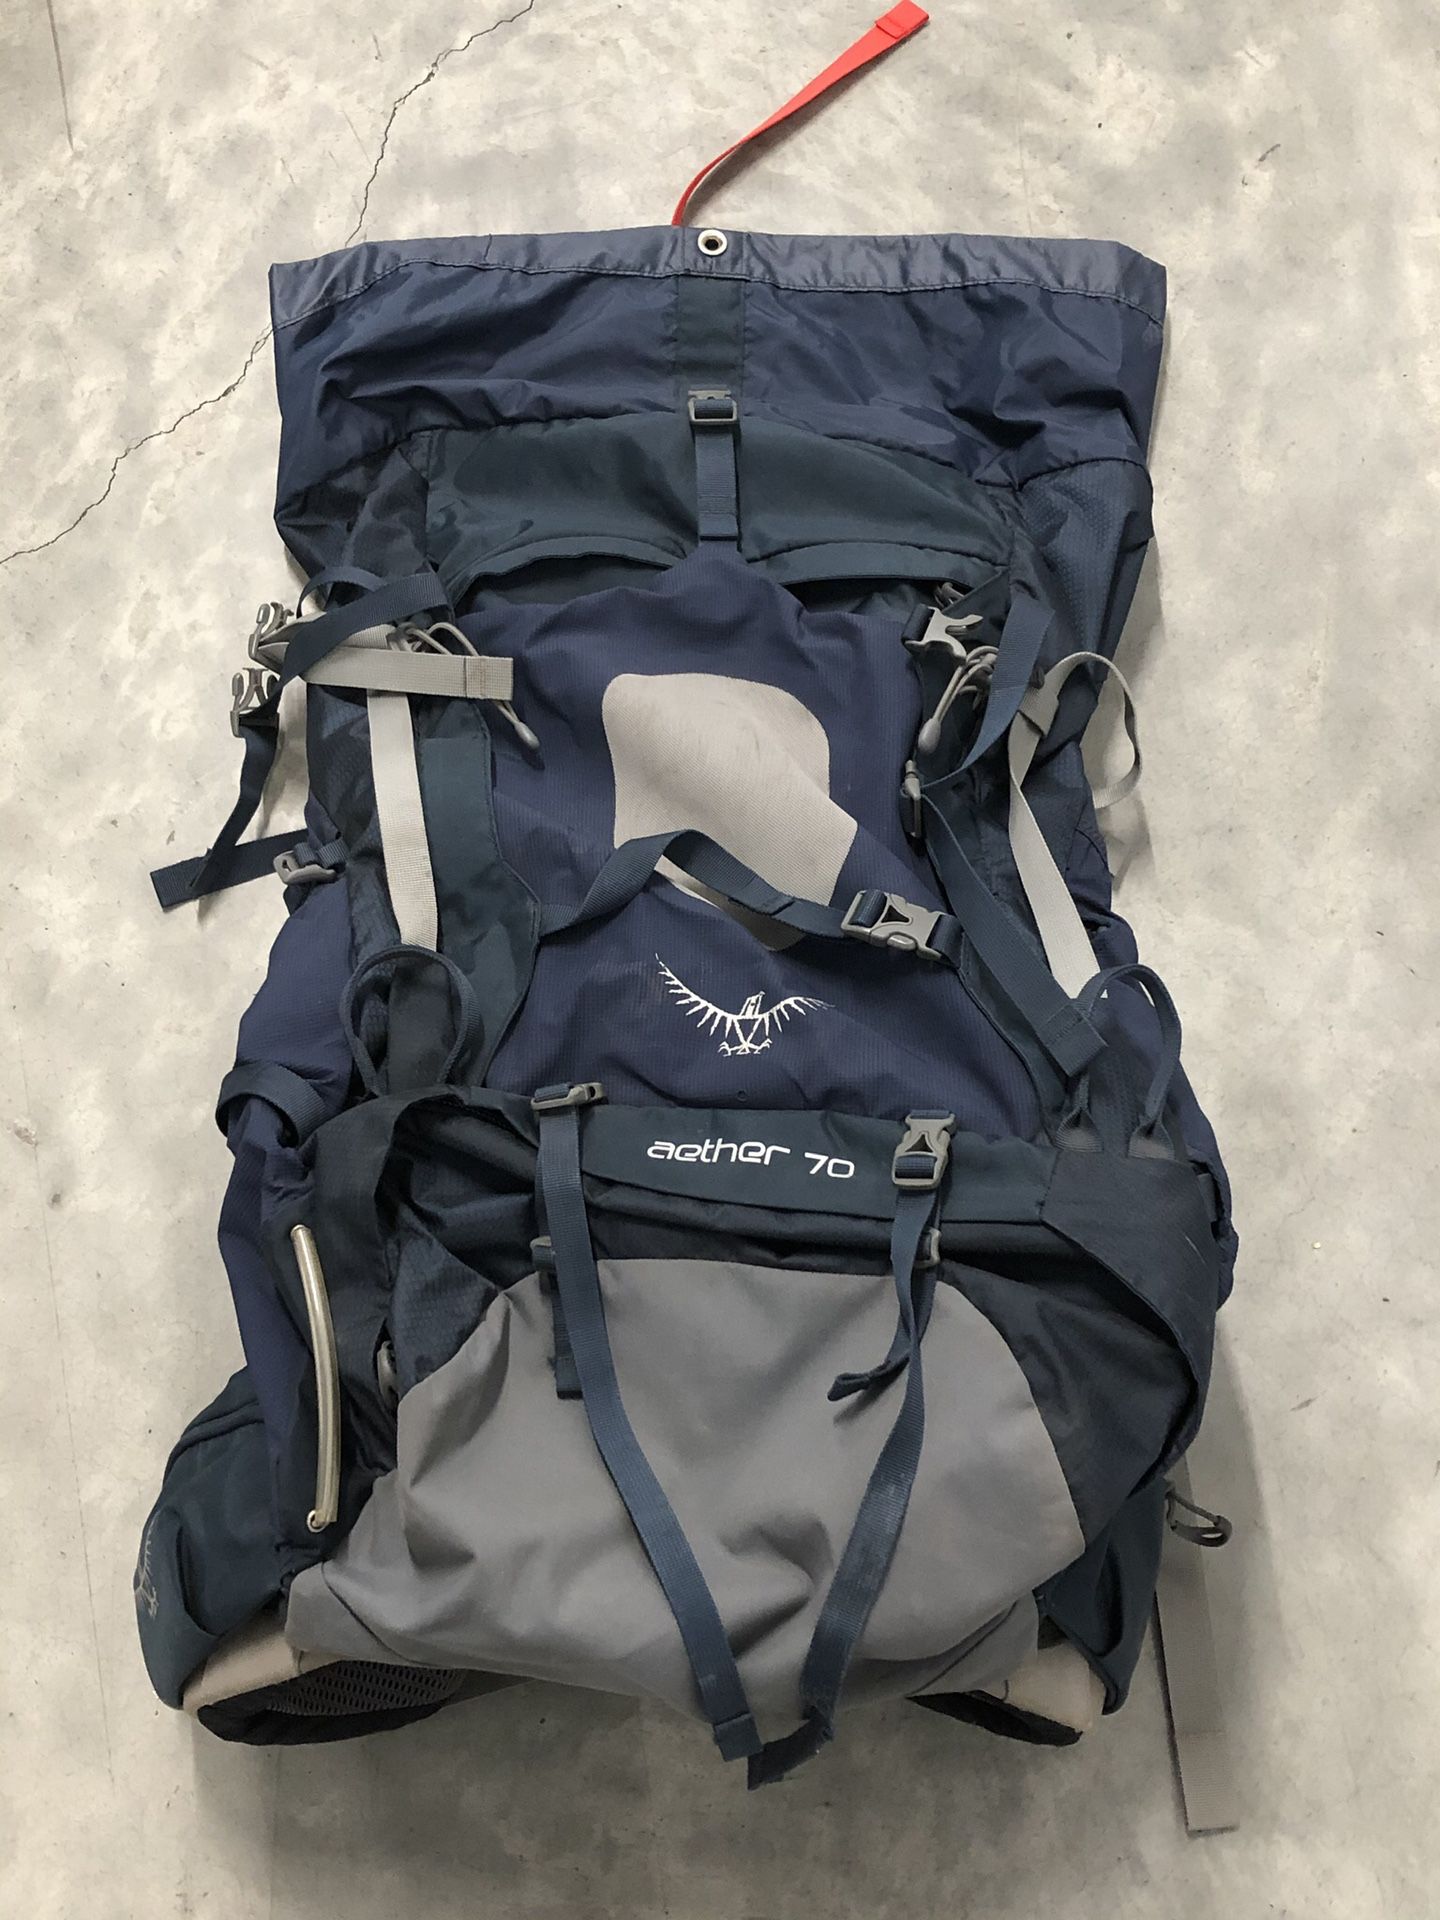 Osprey Aether 70 Hiking Backpack - Retail: $310